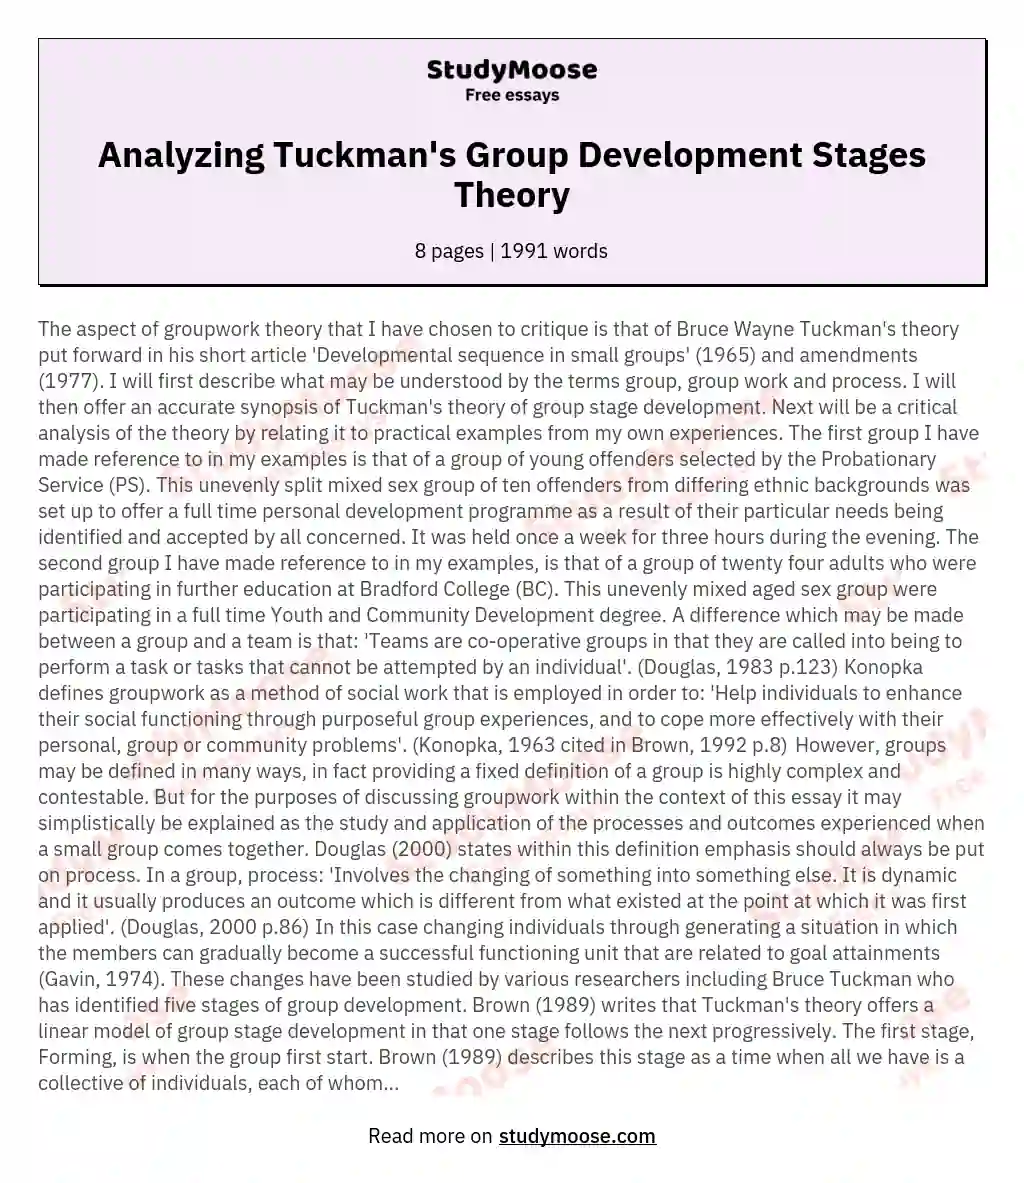 Analyzing Tuckman's Group Development Stages Theory essay